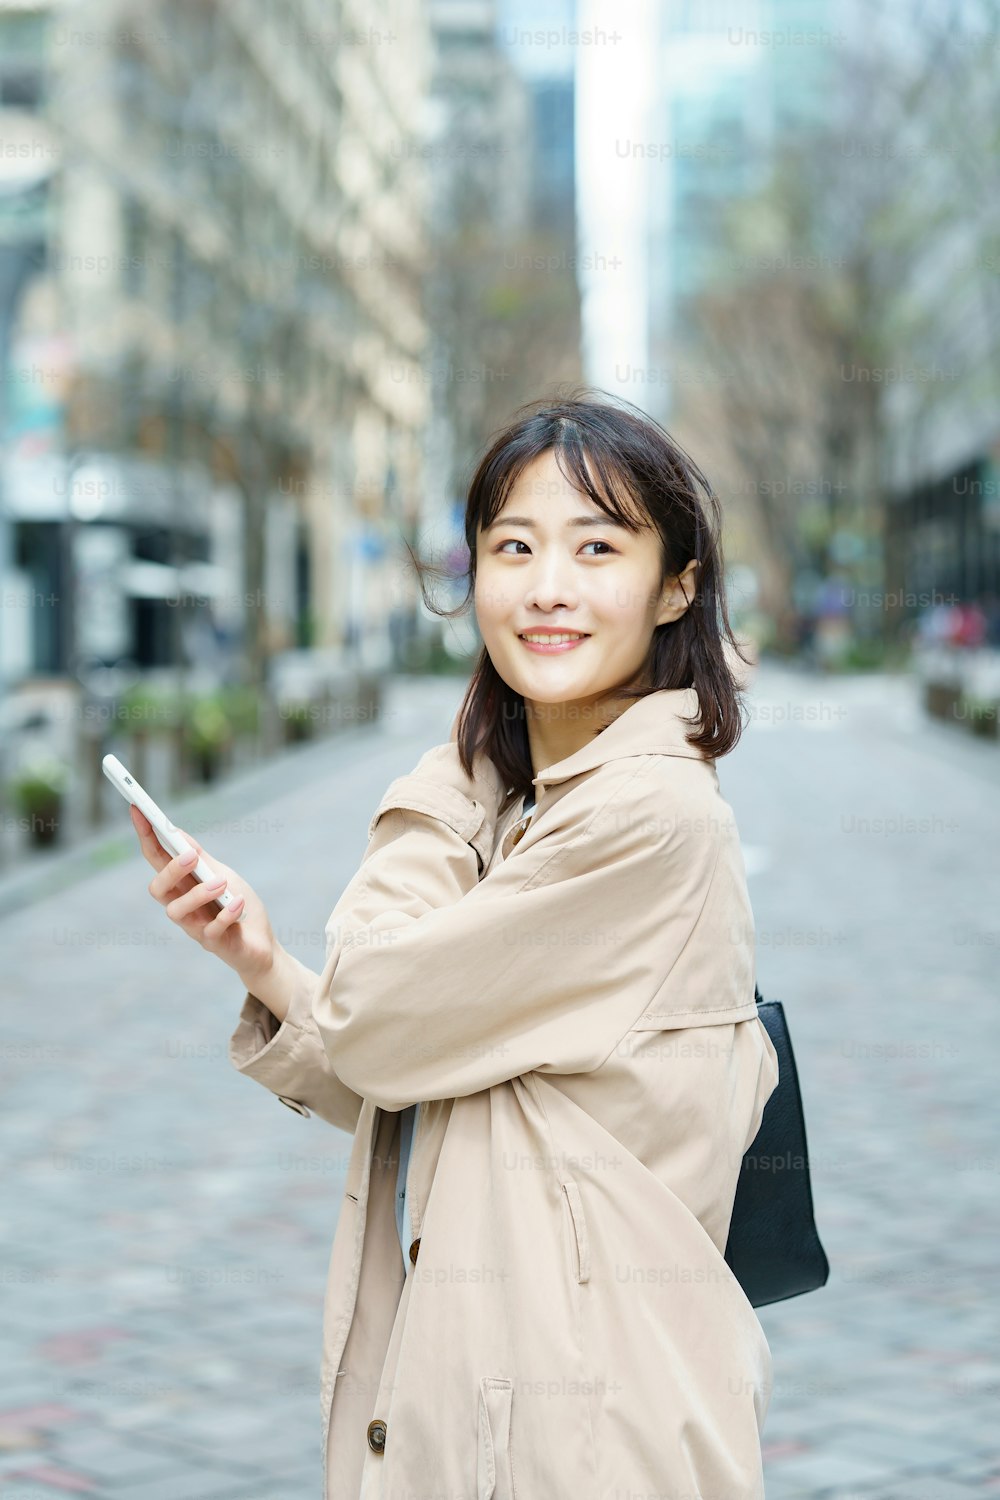 A woman walking in a business district with a smartphone in her hand